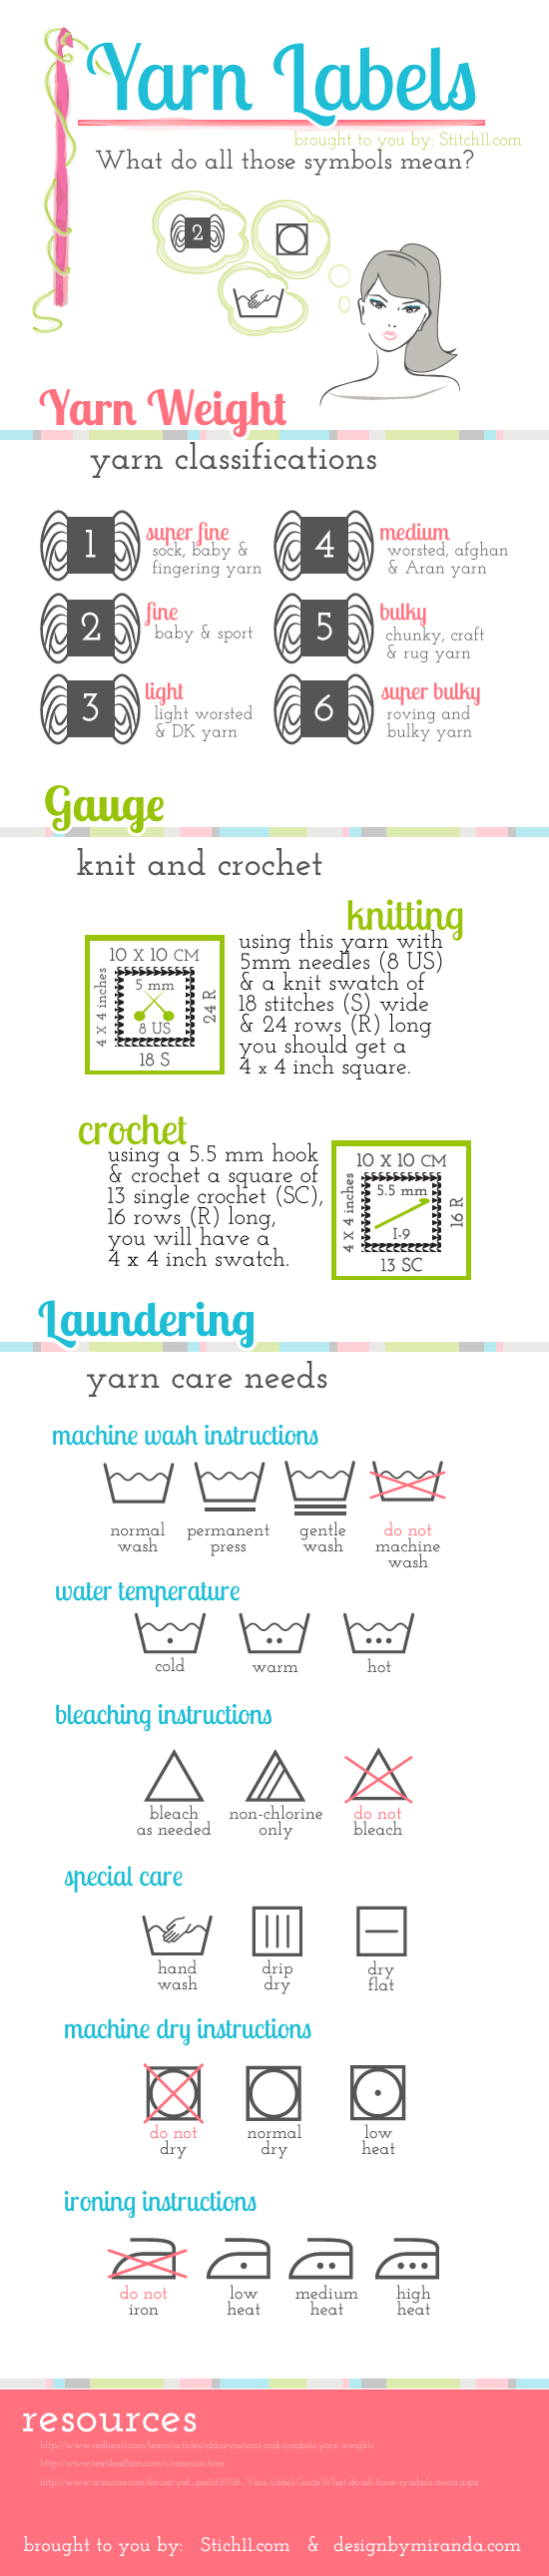 Yarn Label Info Chart — explains the numeric weights and washing symbols